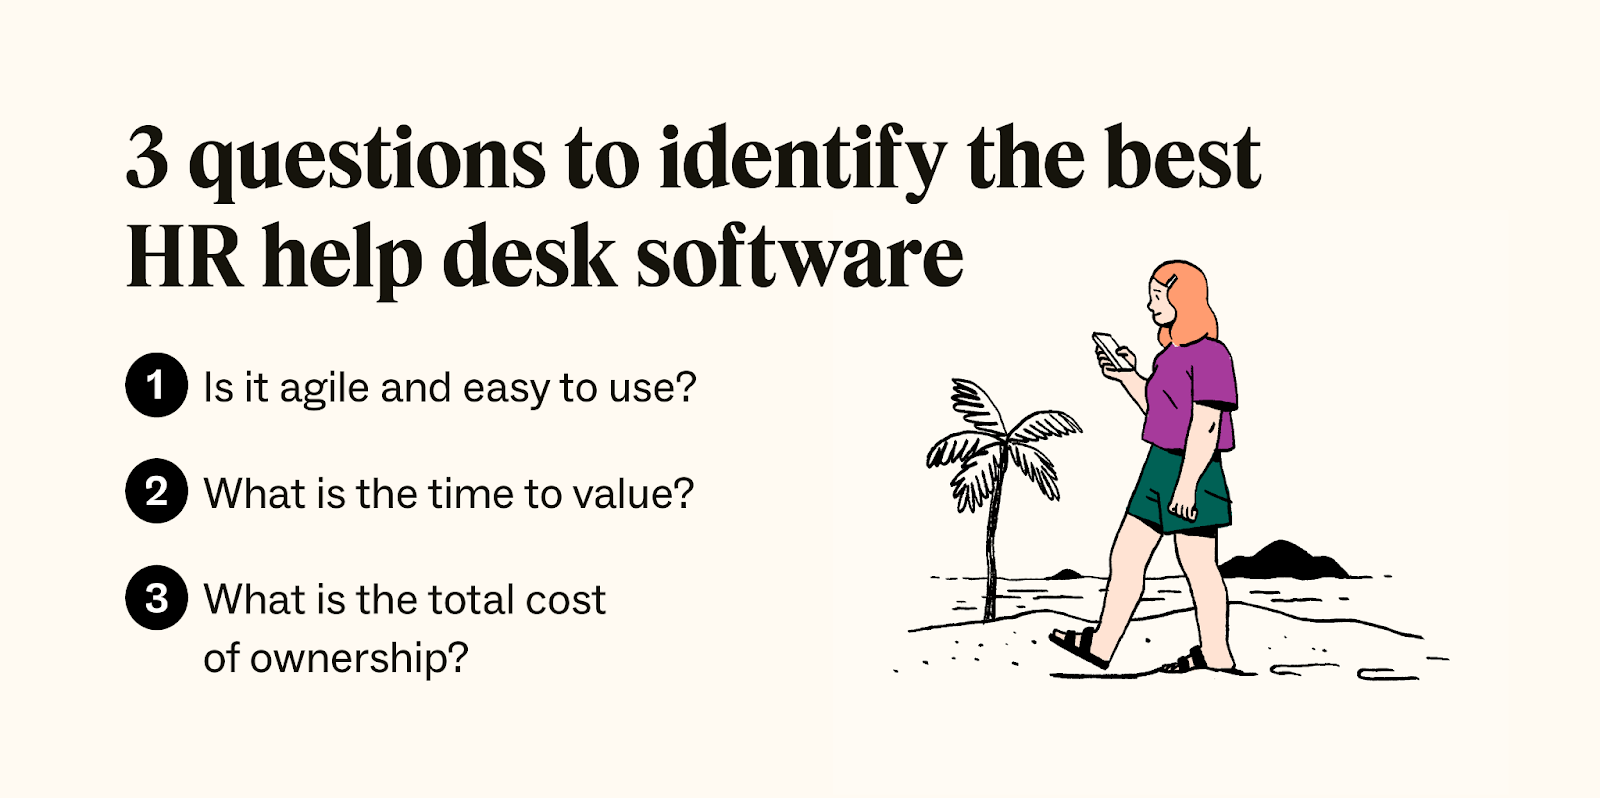 3 questions to identify the best HR help desk software